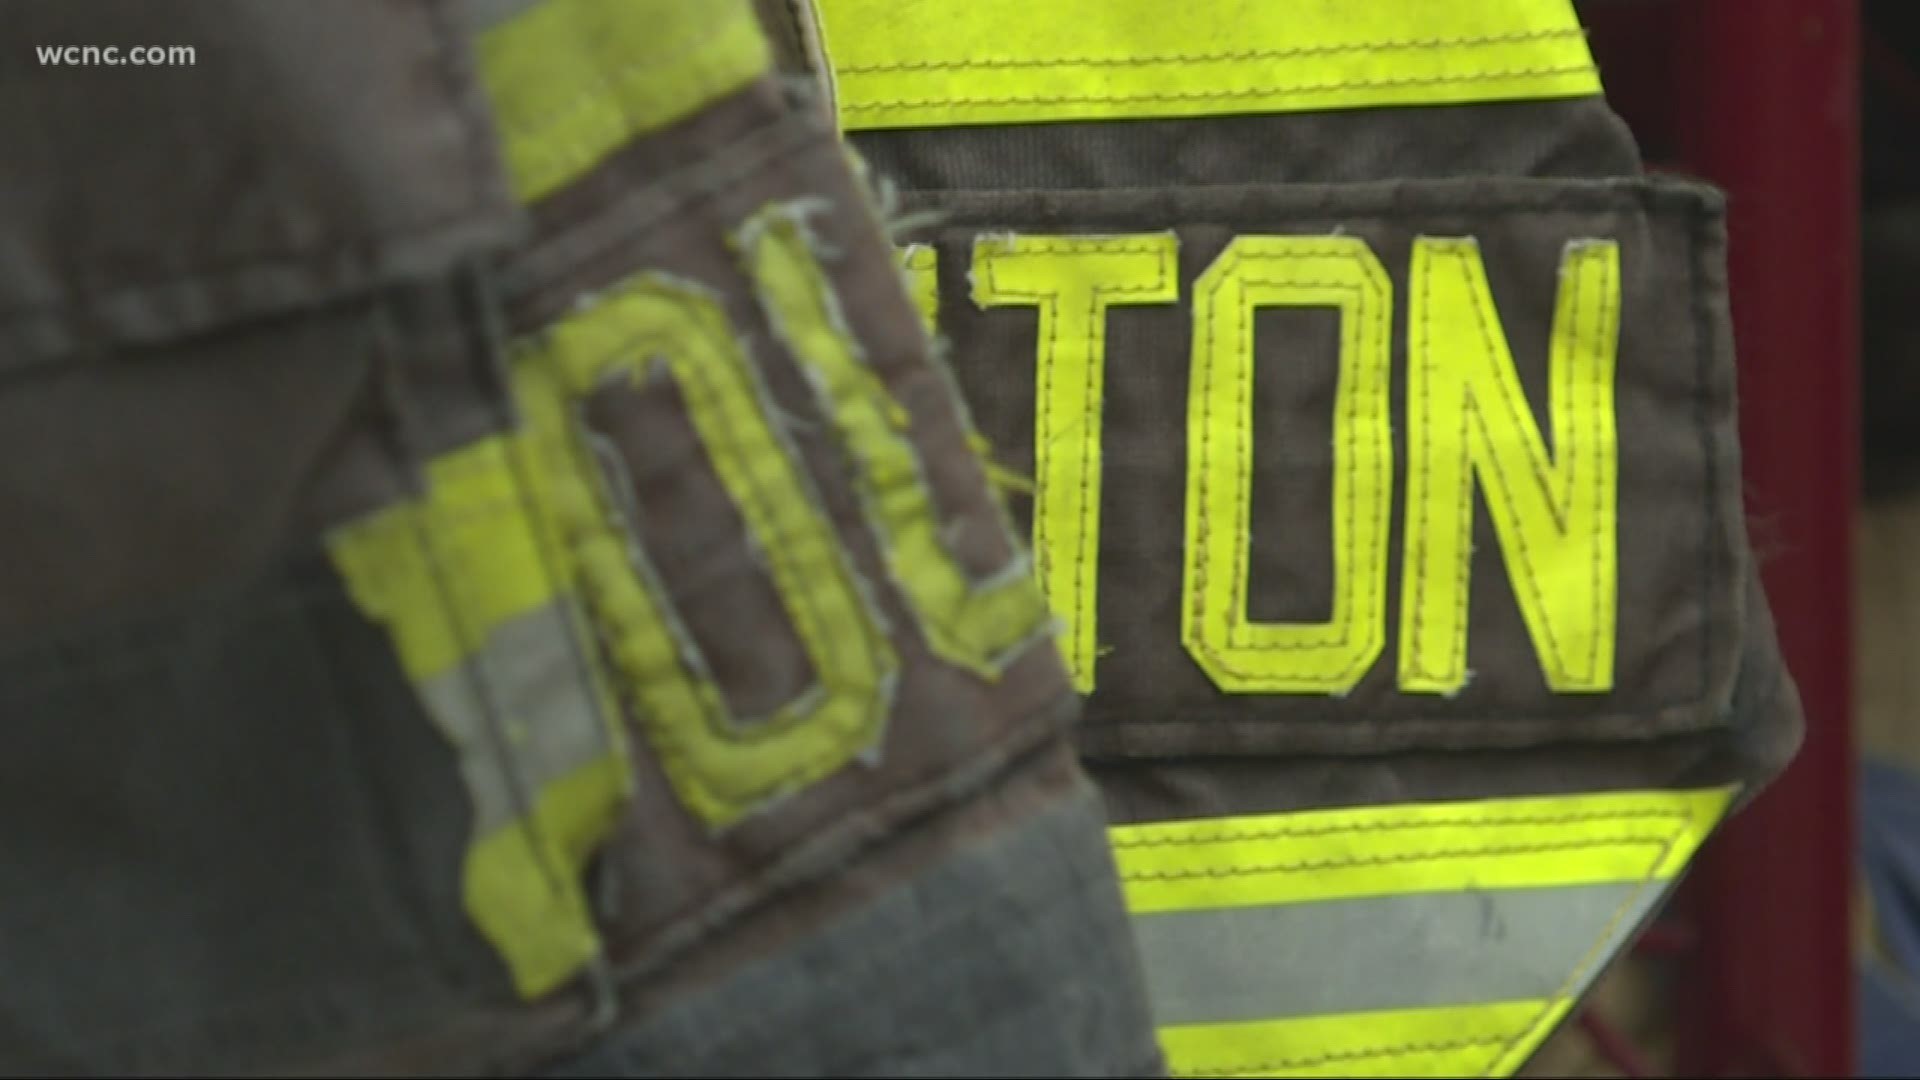 A Union Road volunteer firefighter in Gaston County said someone stole gear he uses to respond to fires.